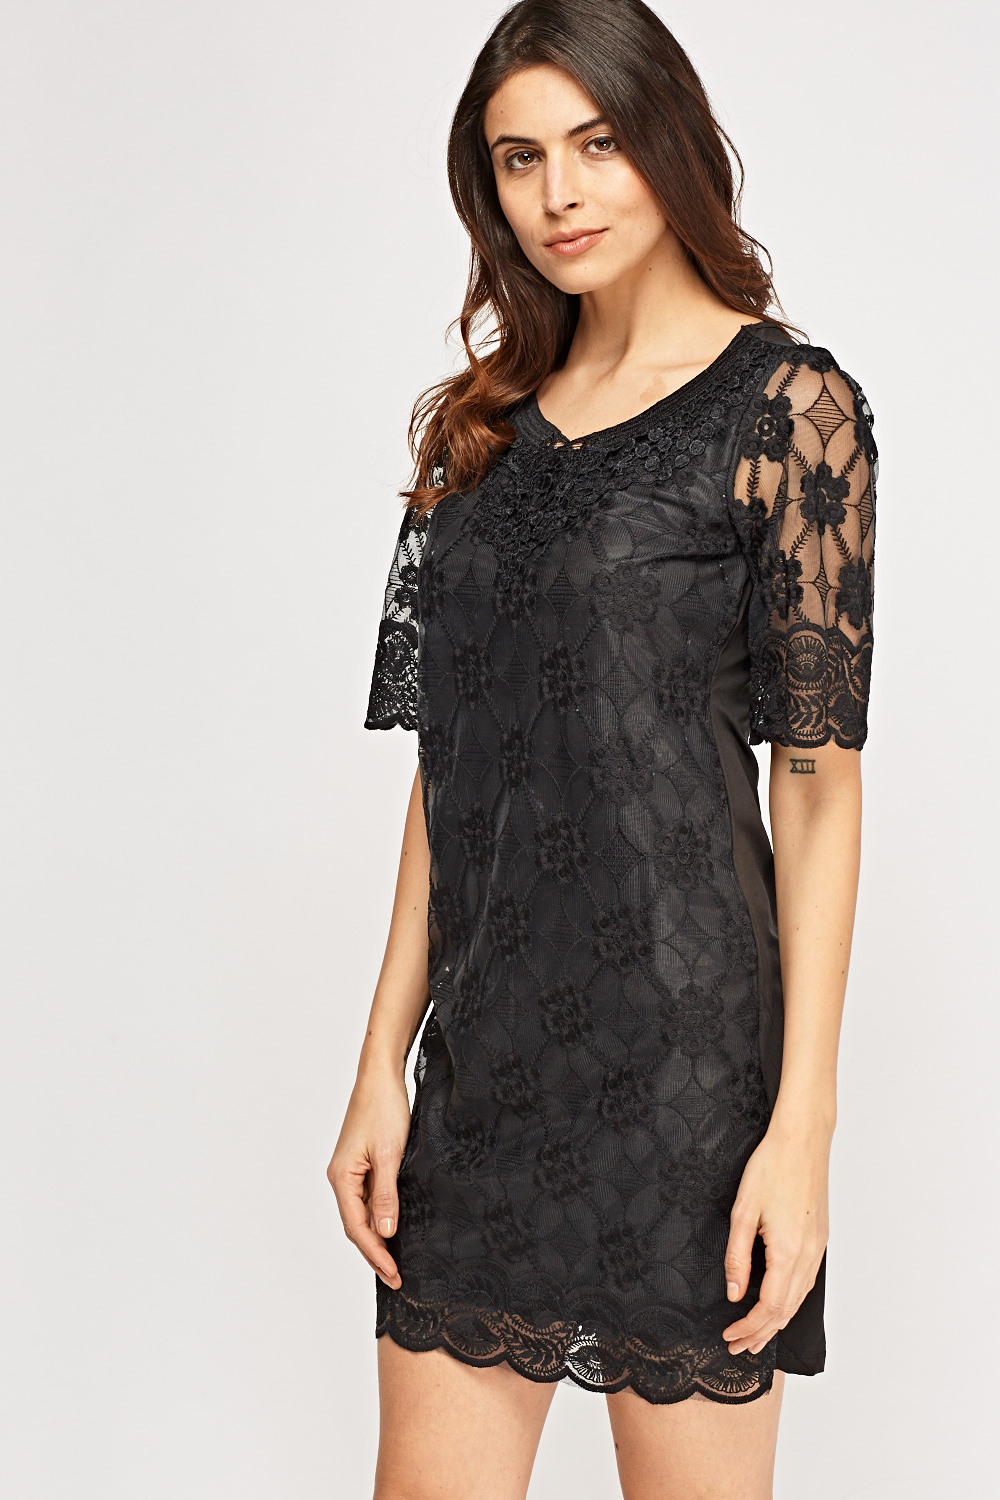 Lace Overlay Shift Dress - Just $7